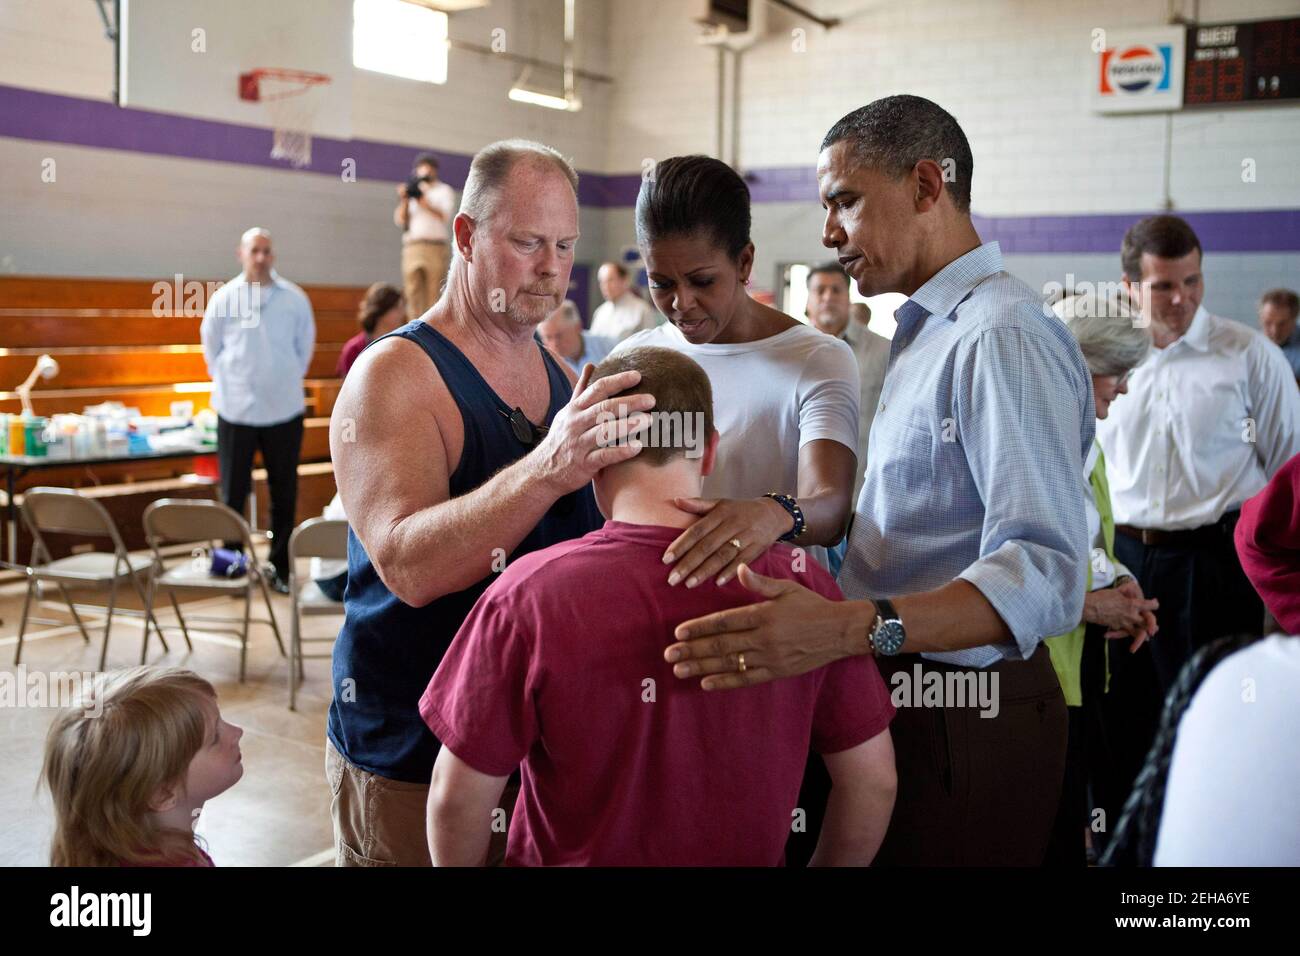 President Barack Obama and First Lady Michelle Obama comfort people at Holt Elementary School in Holt, Ala., April 29, 2011. The President and First Lady traveled to Alabama to visit storm damaged neighborhoods and meet with families affected by deadly tornados. Stock Photo